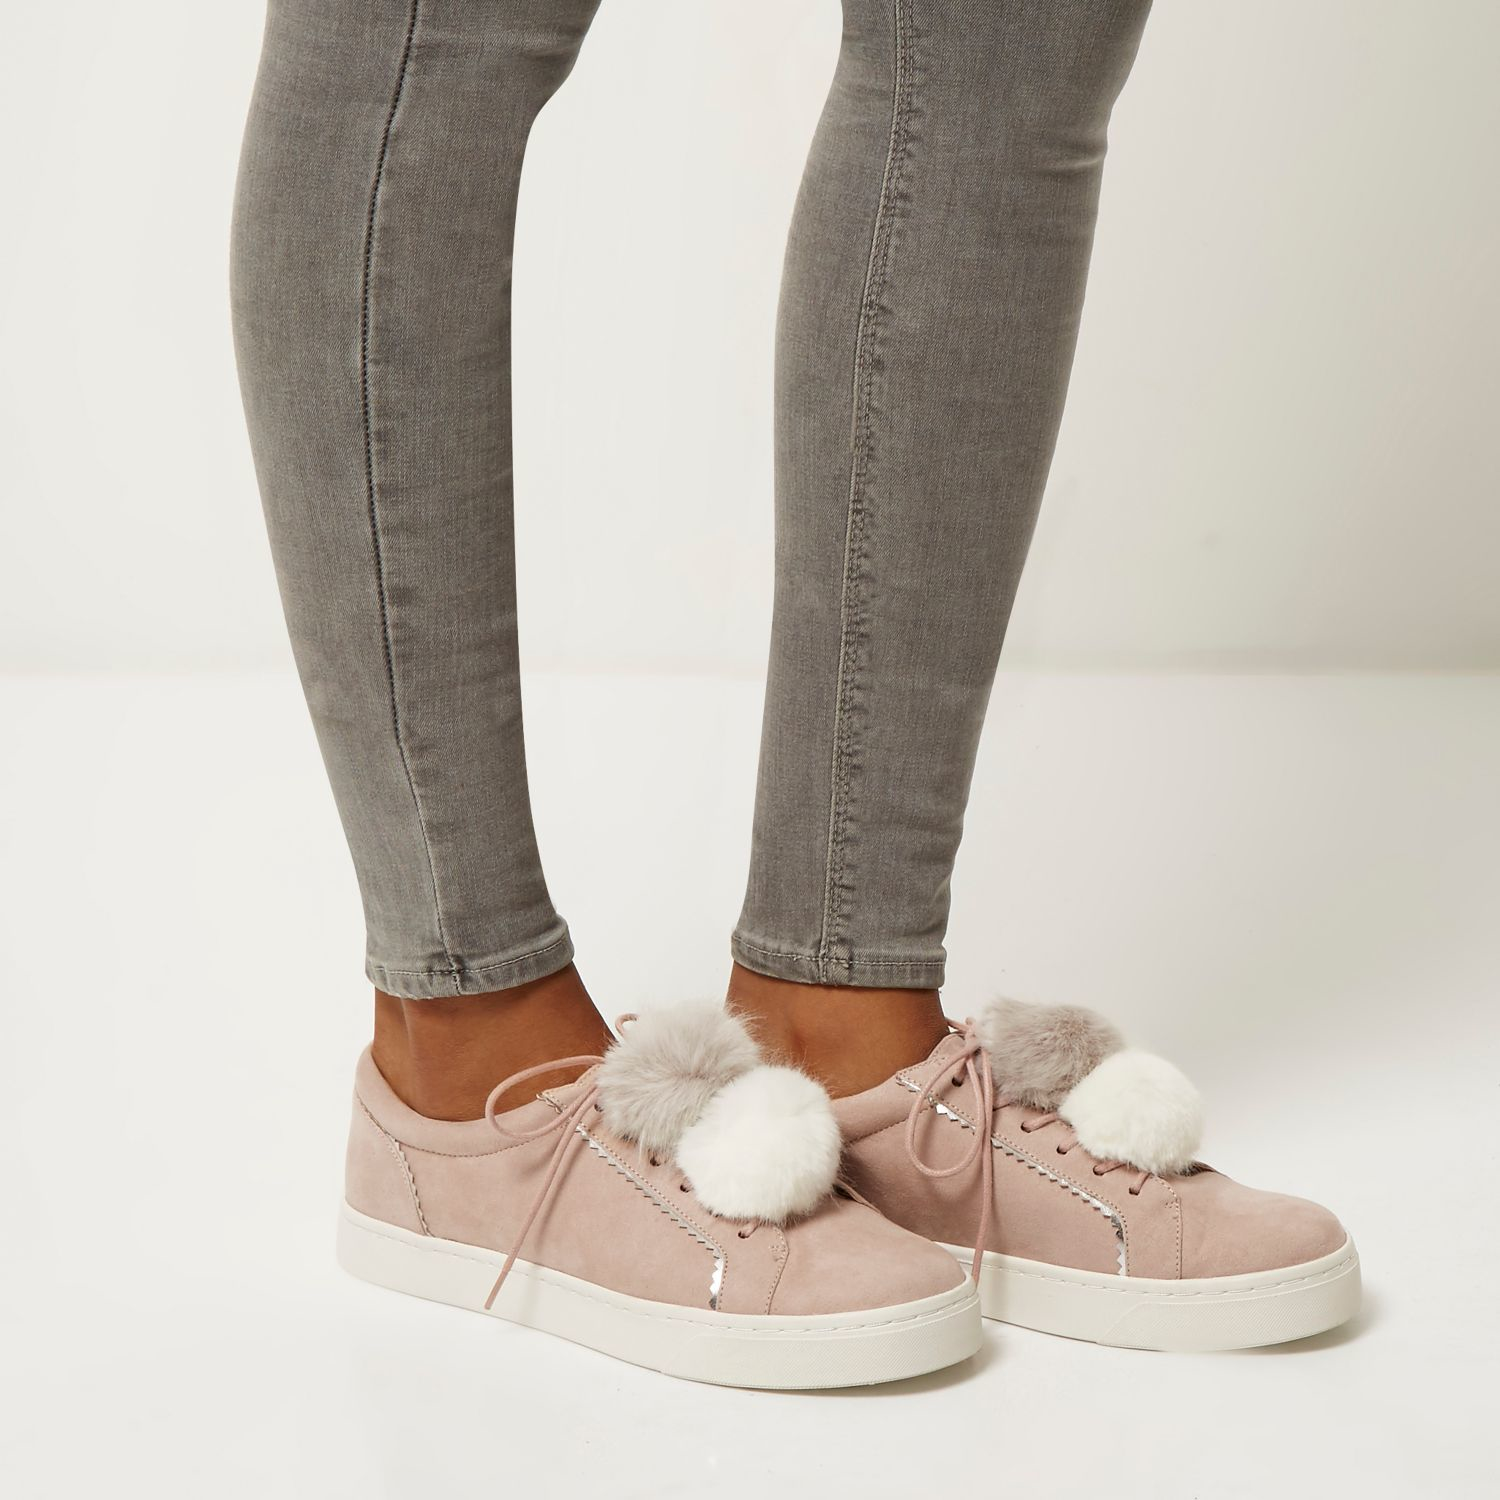 Lyst - River Island Light Pink Pom Pom Trainers in Pink